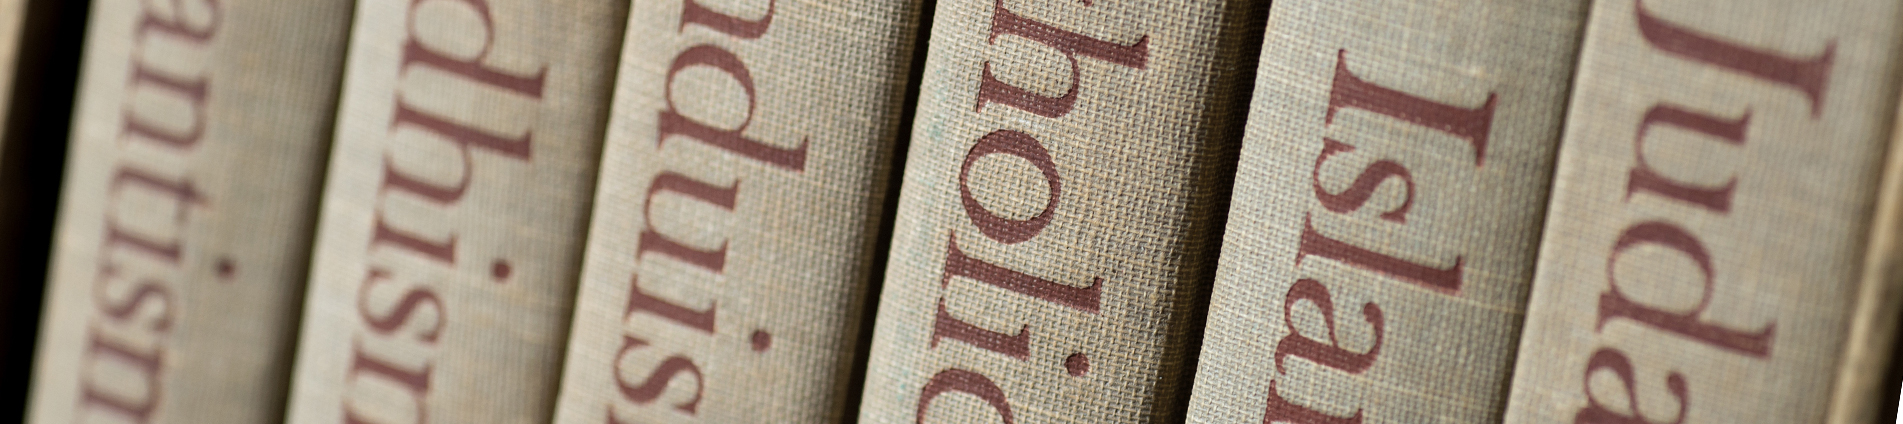 A closeup of the spines of books on different religions 